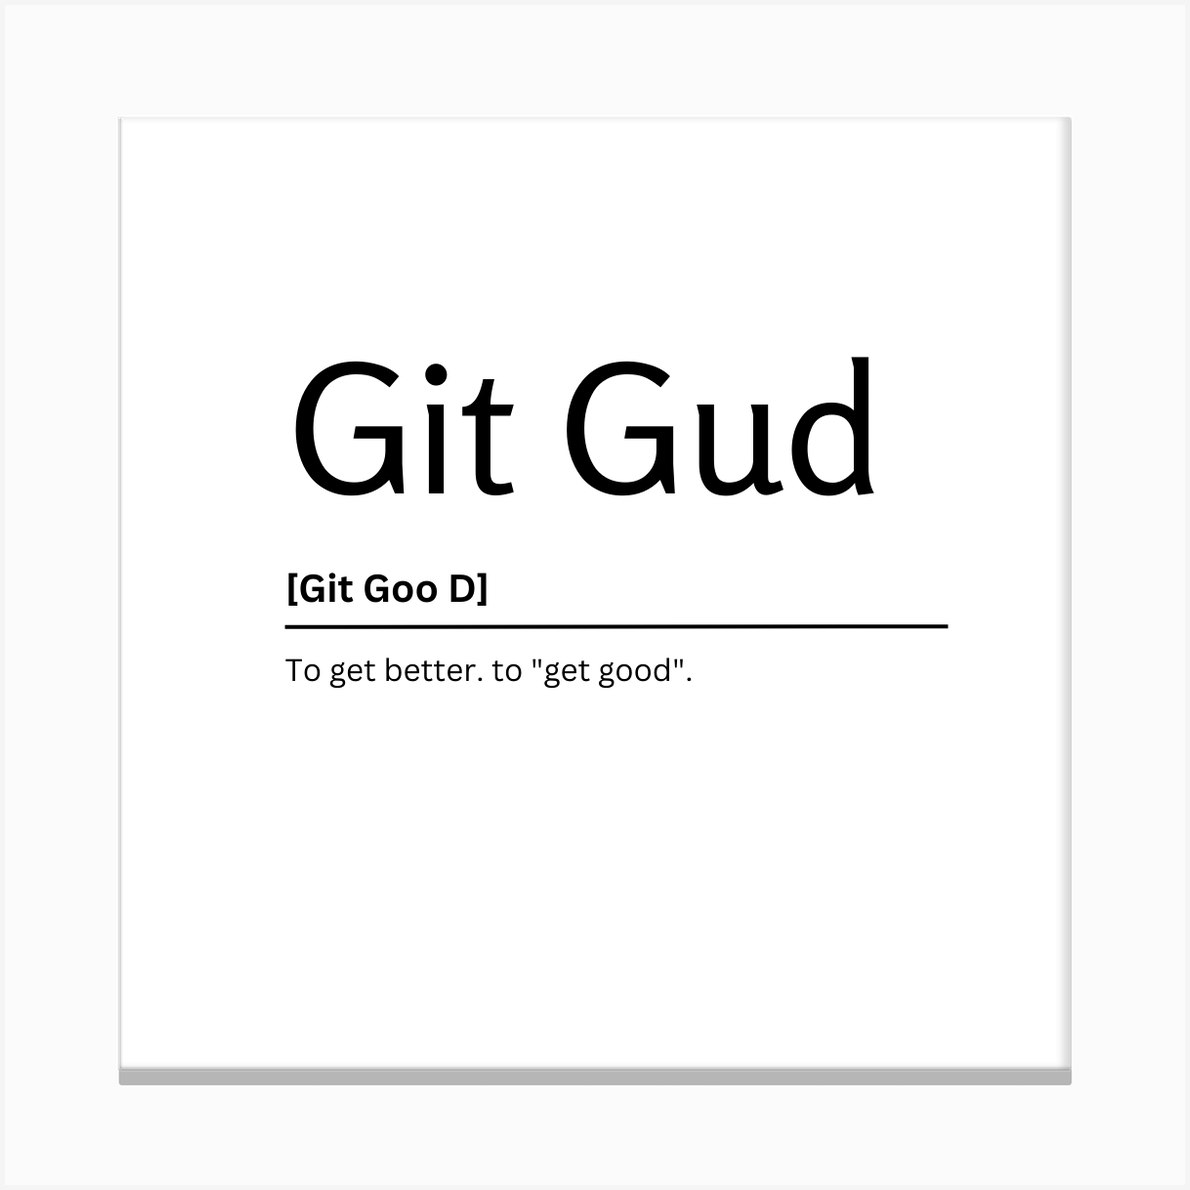 Git Gud Dictionary Definition Funny Quote Art Print Canvas Print, git gud  meaning 